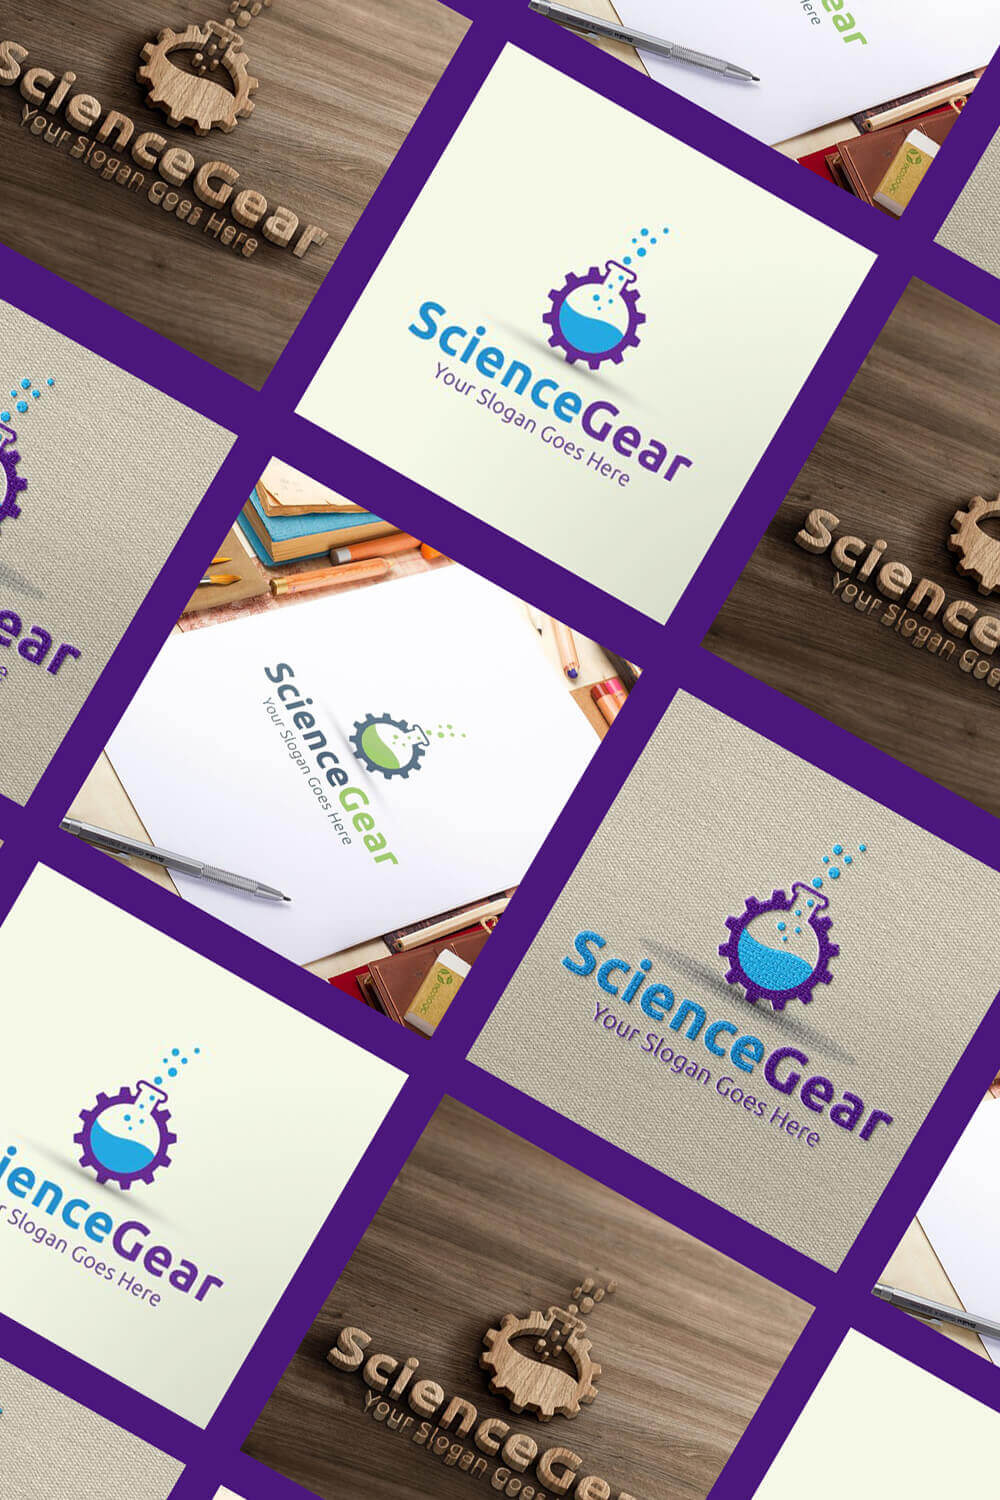 Science Gear logos on various surfaces in square purple frames at a forty-five degree angle.